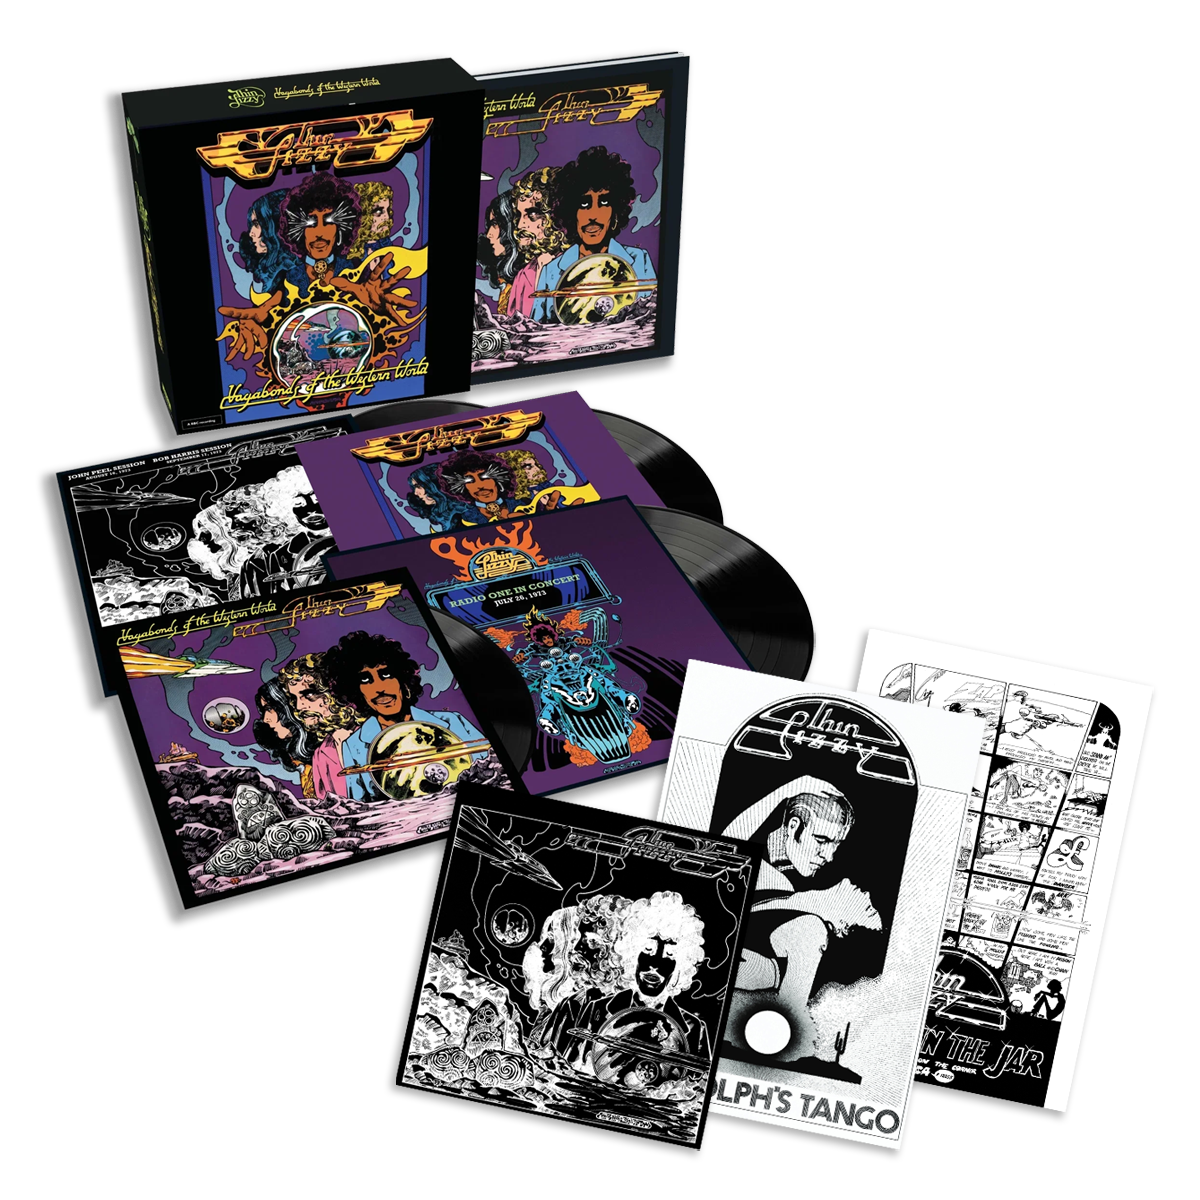 Vagabonds of the Western World: Super Deluxe Vinyl 4LP Box Set, Exclusive Artcard (signed by Eric Bell) + Jim Fitzpatrick Poster Set